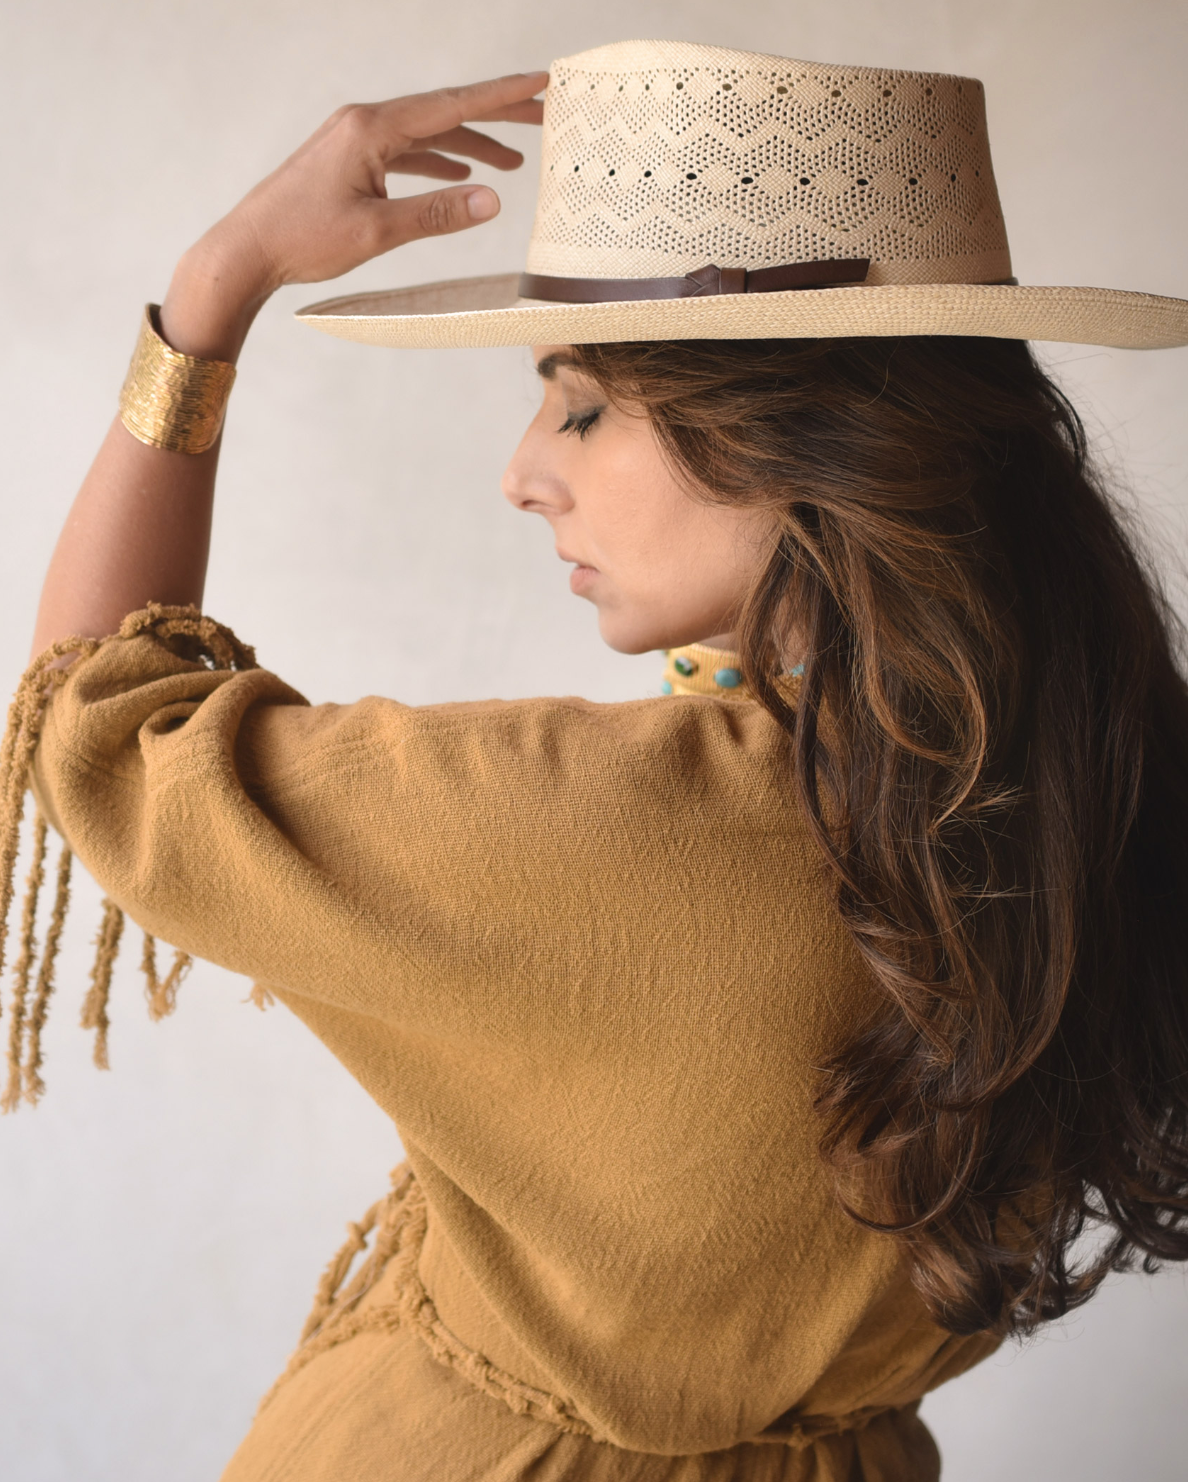 A woman in profile, wearing a Ninakuru Kaela Extra Long Brim M hat crafted from artisanal Toquilla straw and a textured mustard dress with fringe details, touches the rim of her hat. Her wavy hair cascades down her back.